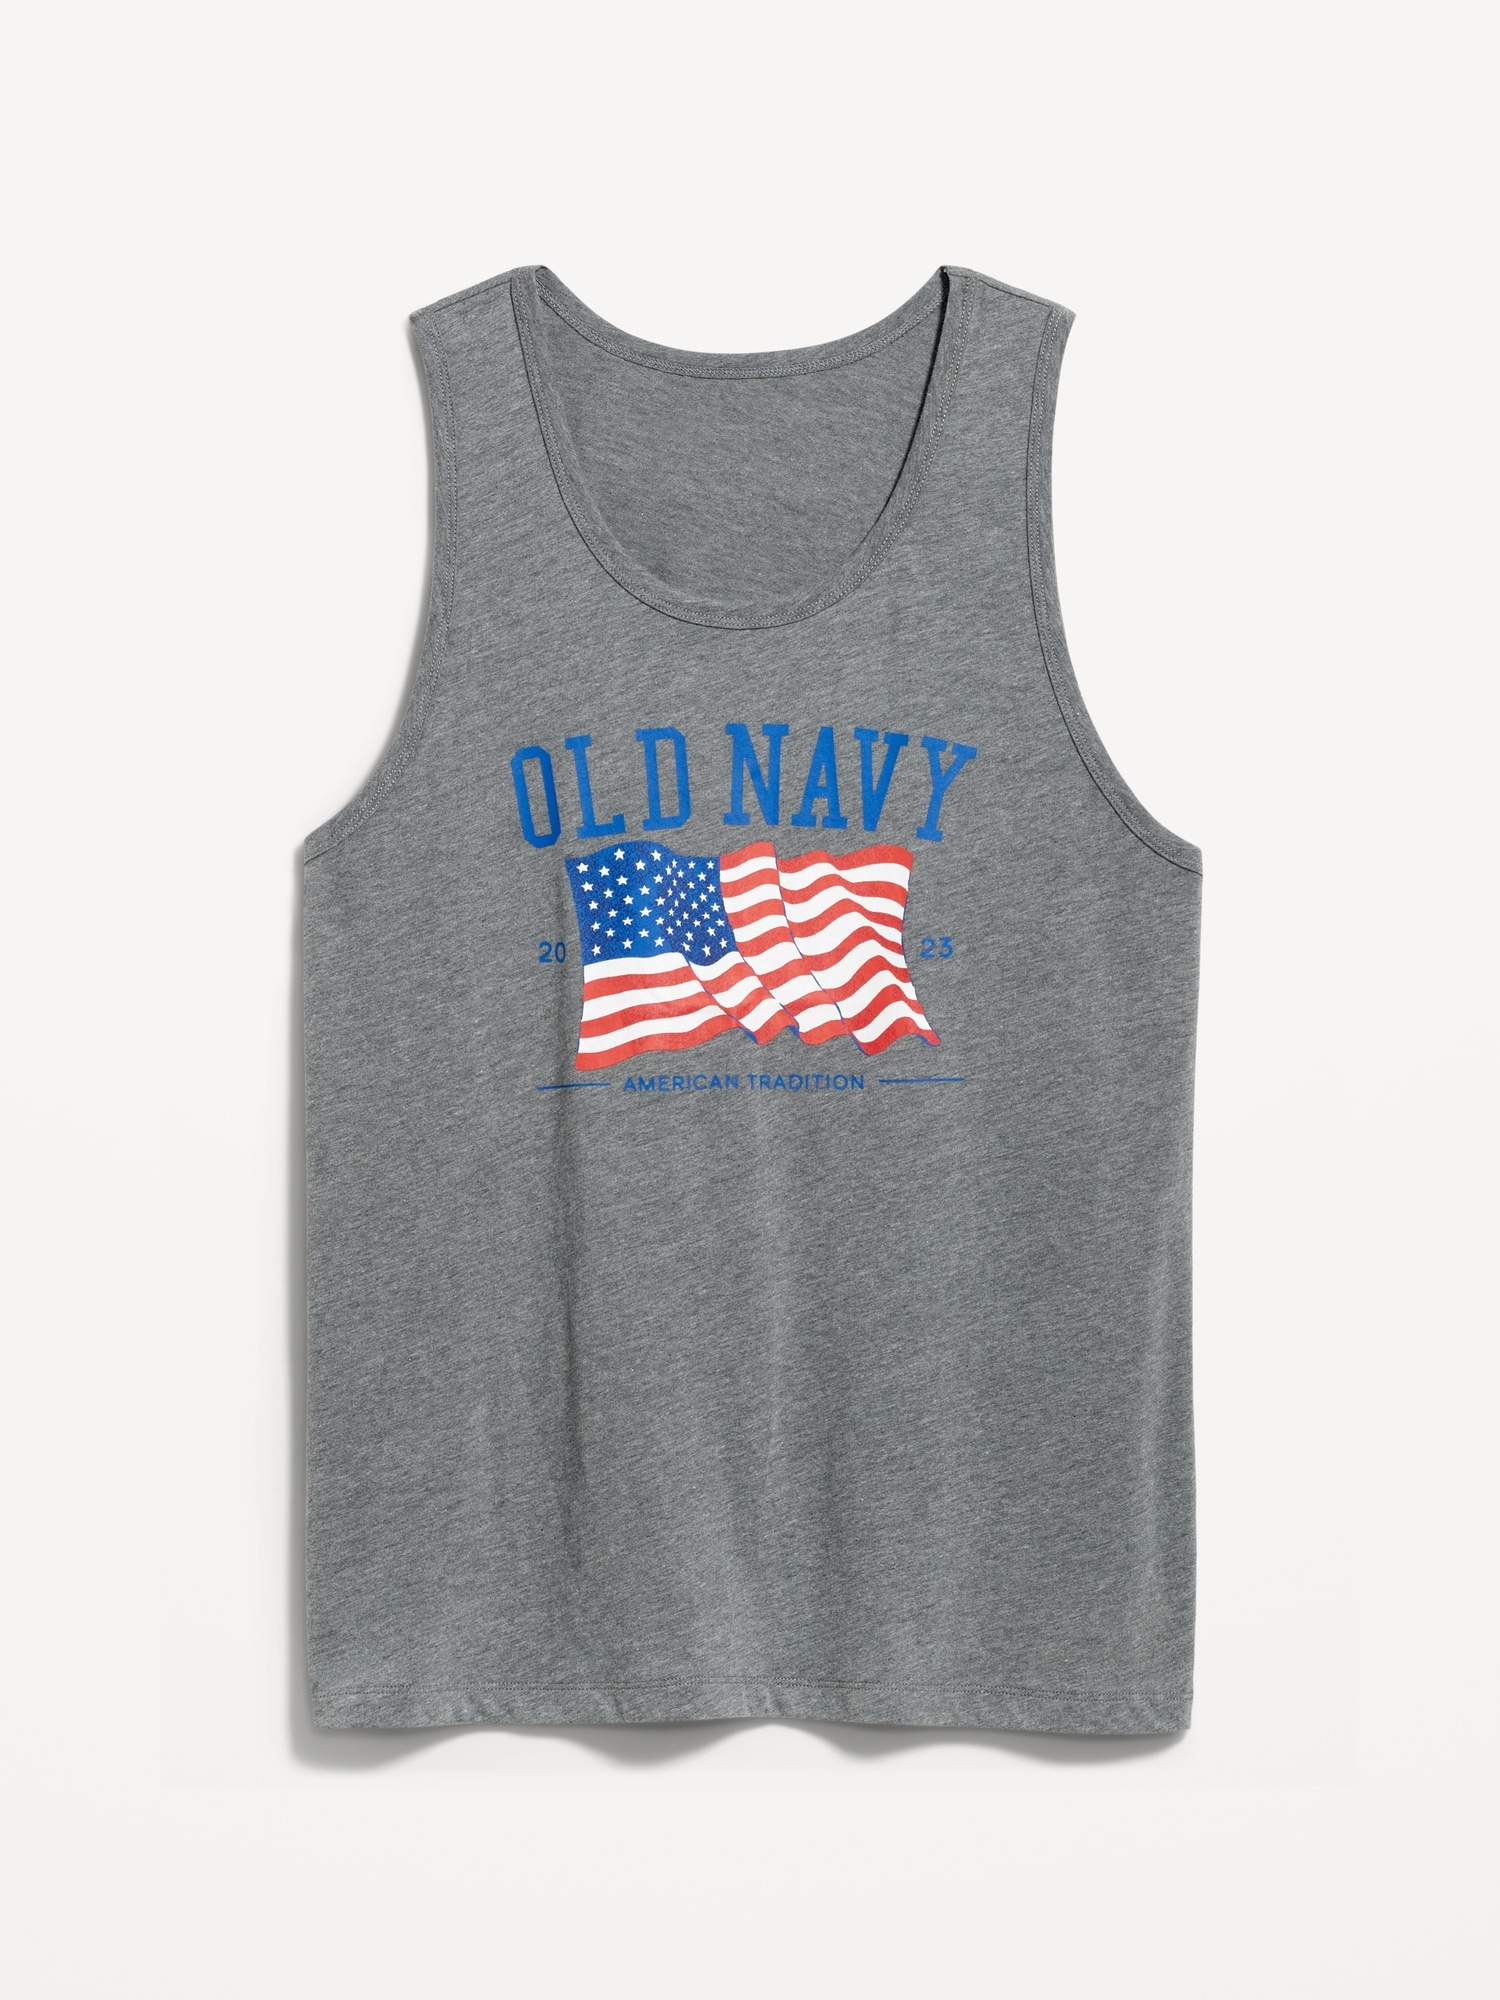 Best Old Navy Clothes on Sale Fourth of July Weekend